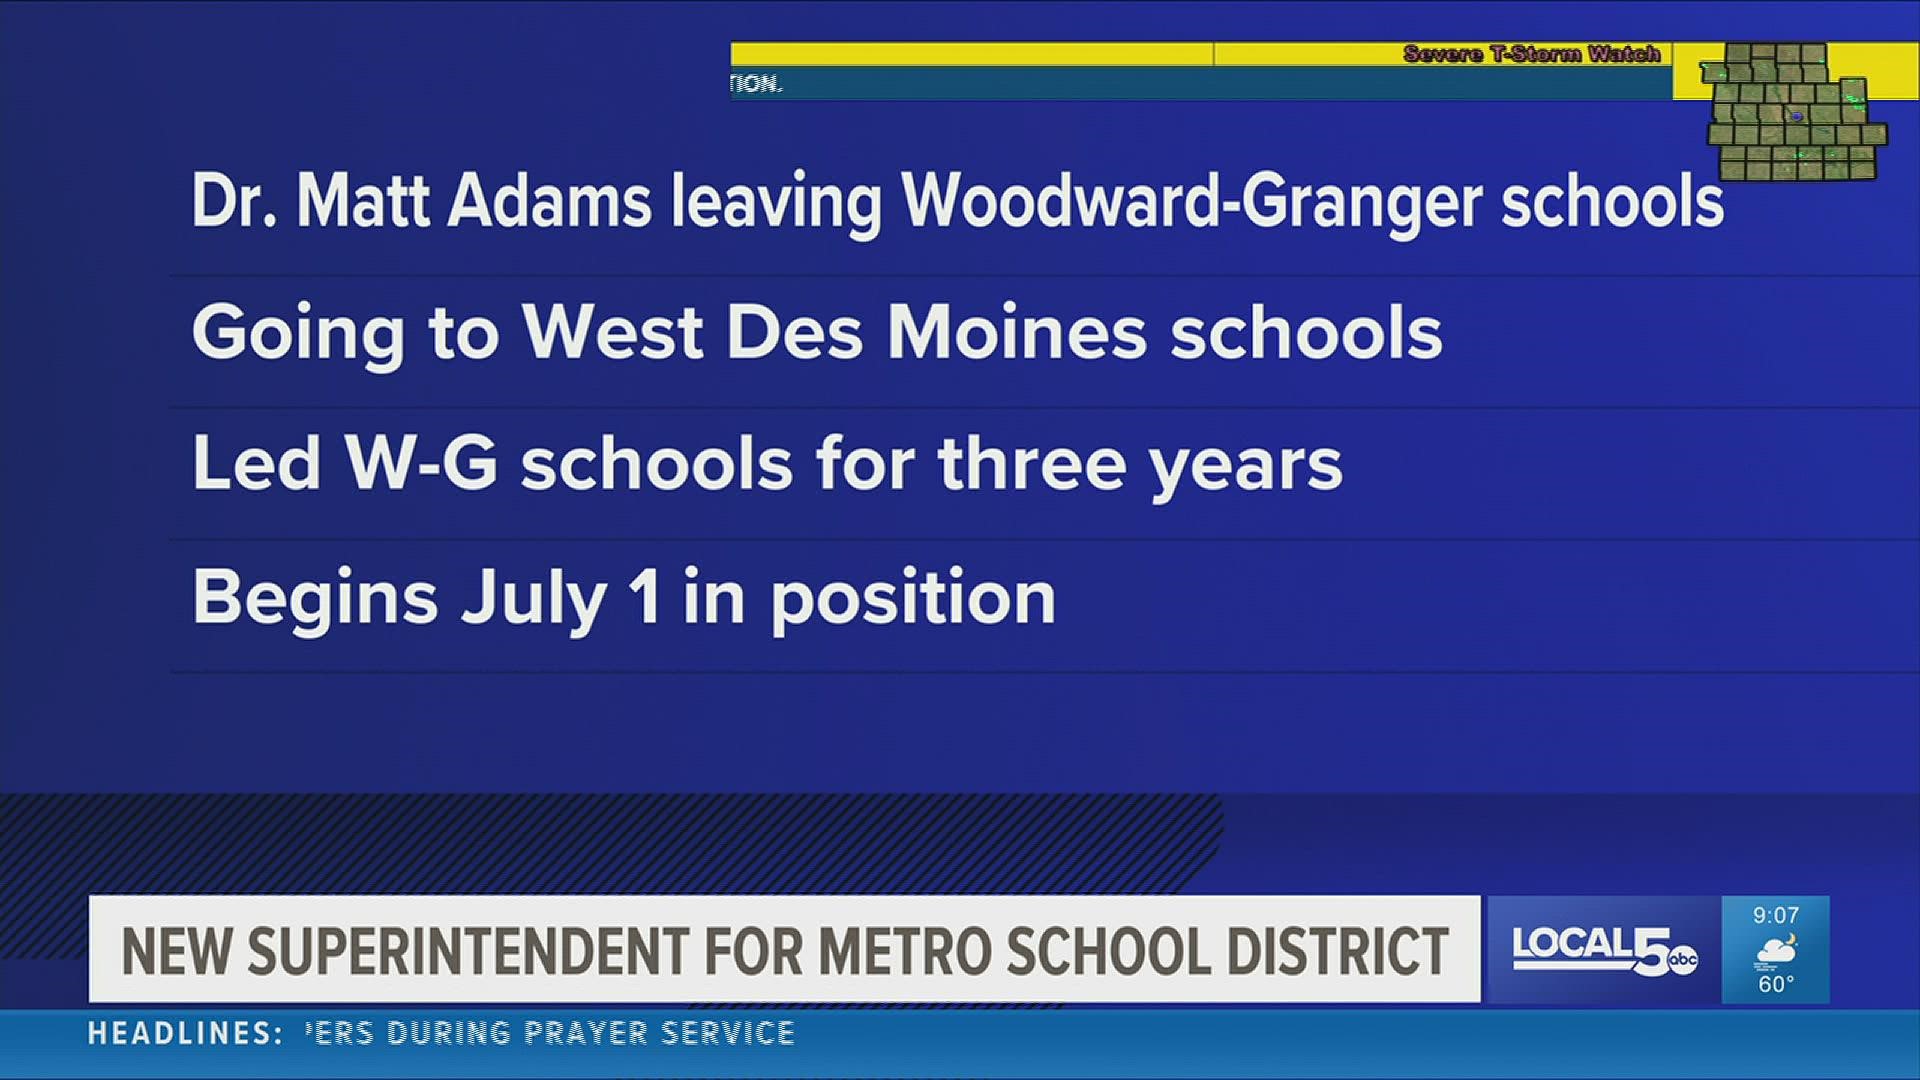 Dr. Matt Adams wrote to families in a letter Friday he is resigning soon to take the same position leading West Des Moines schools.